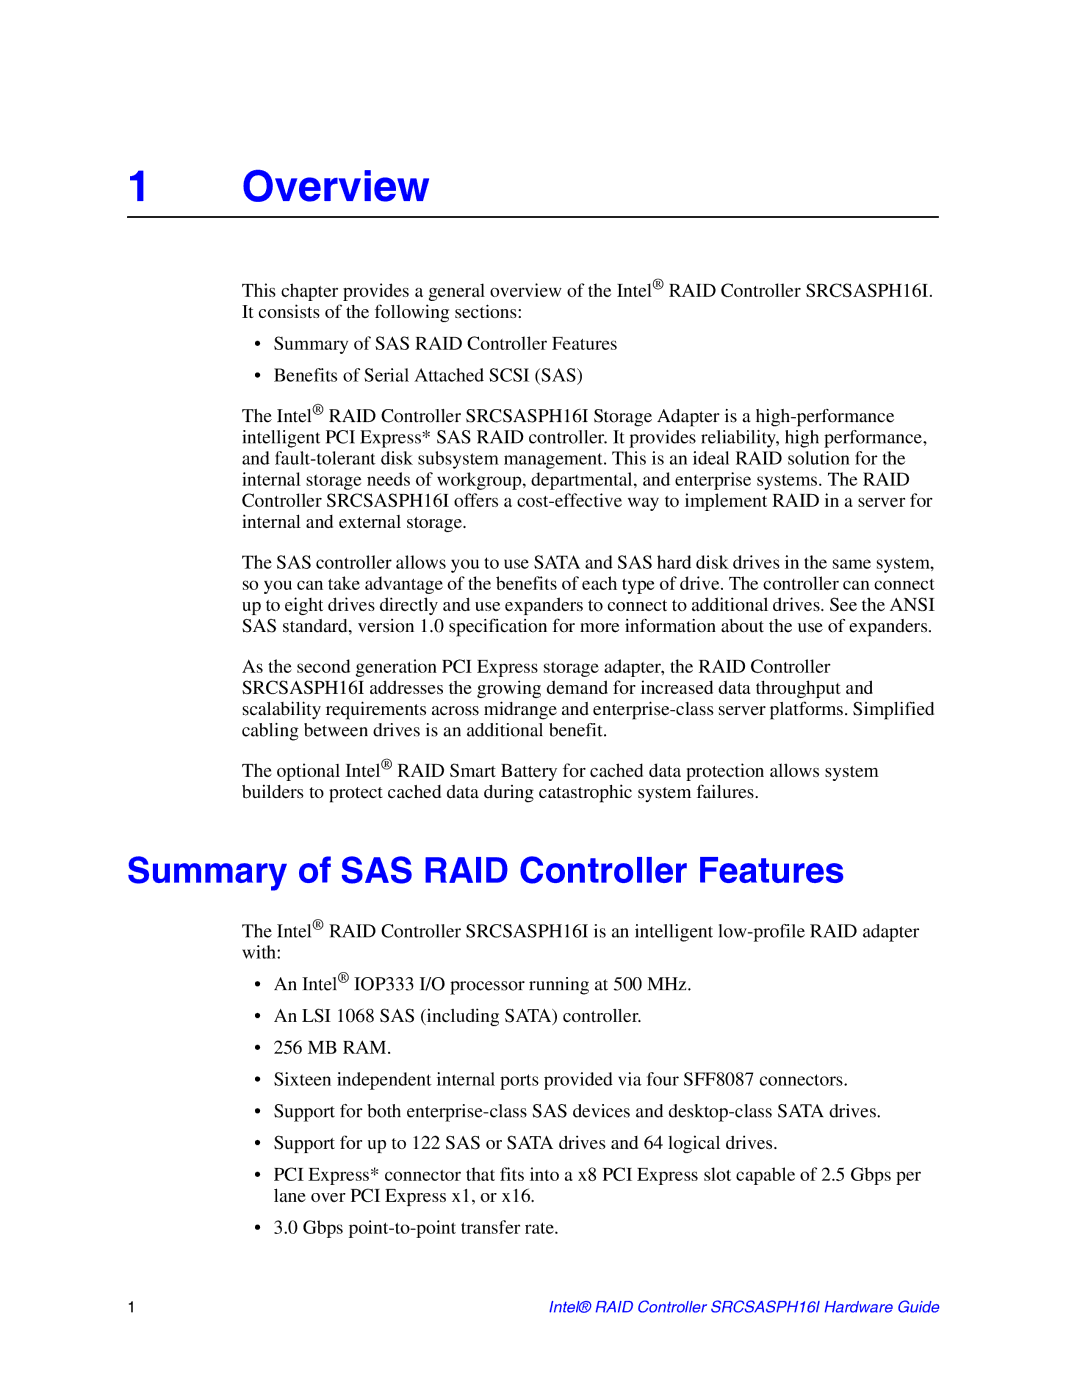 Intel SRCSASPH16I manual Overview, Summary of SAS RAID Controller Features 